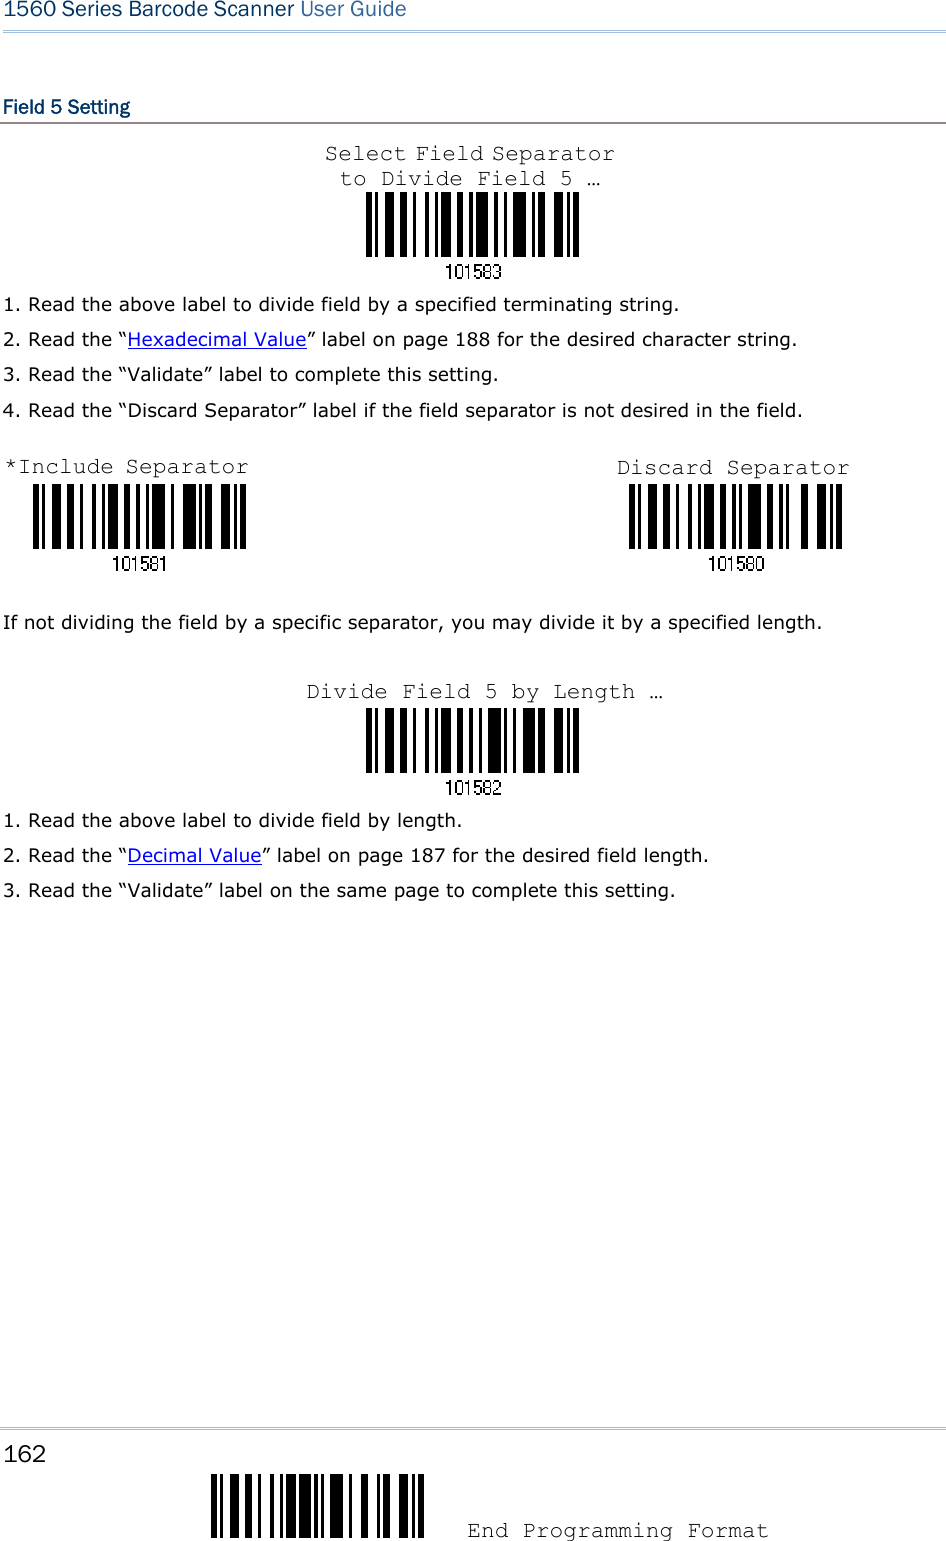 162  End Programming Format 1560 Series Barcode Scanner User Guide  Field 5 Setting    1. Read the above label to divide field by a specified terminating string. 2. Read the “Hexadecimal Value” label on page 188 for the desired character string.   3. Read the “Validate” label to complete this setting. 4. Read the “Discard Separator” label if the field separator is not desired in the field.                                 If not dividing the field by a specific separator, you may divide it by a specified length.    1. Read the above label to divide field by length. 2. Read the “Decimal Value” label on page 187 for the desired field length. 3. Read the “Validate” label on the same page to complete this setting.                   Select Field Separator to Divide Field 5 … *Include Separator Discard Separator Divide Field 5 by Length …